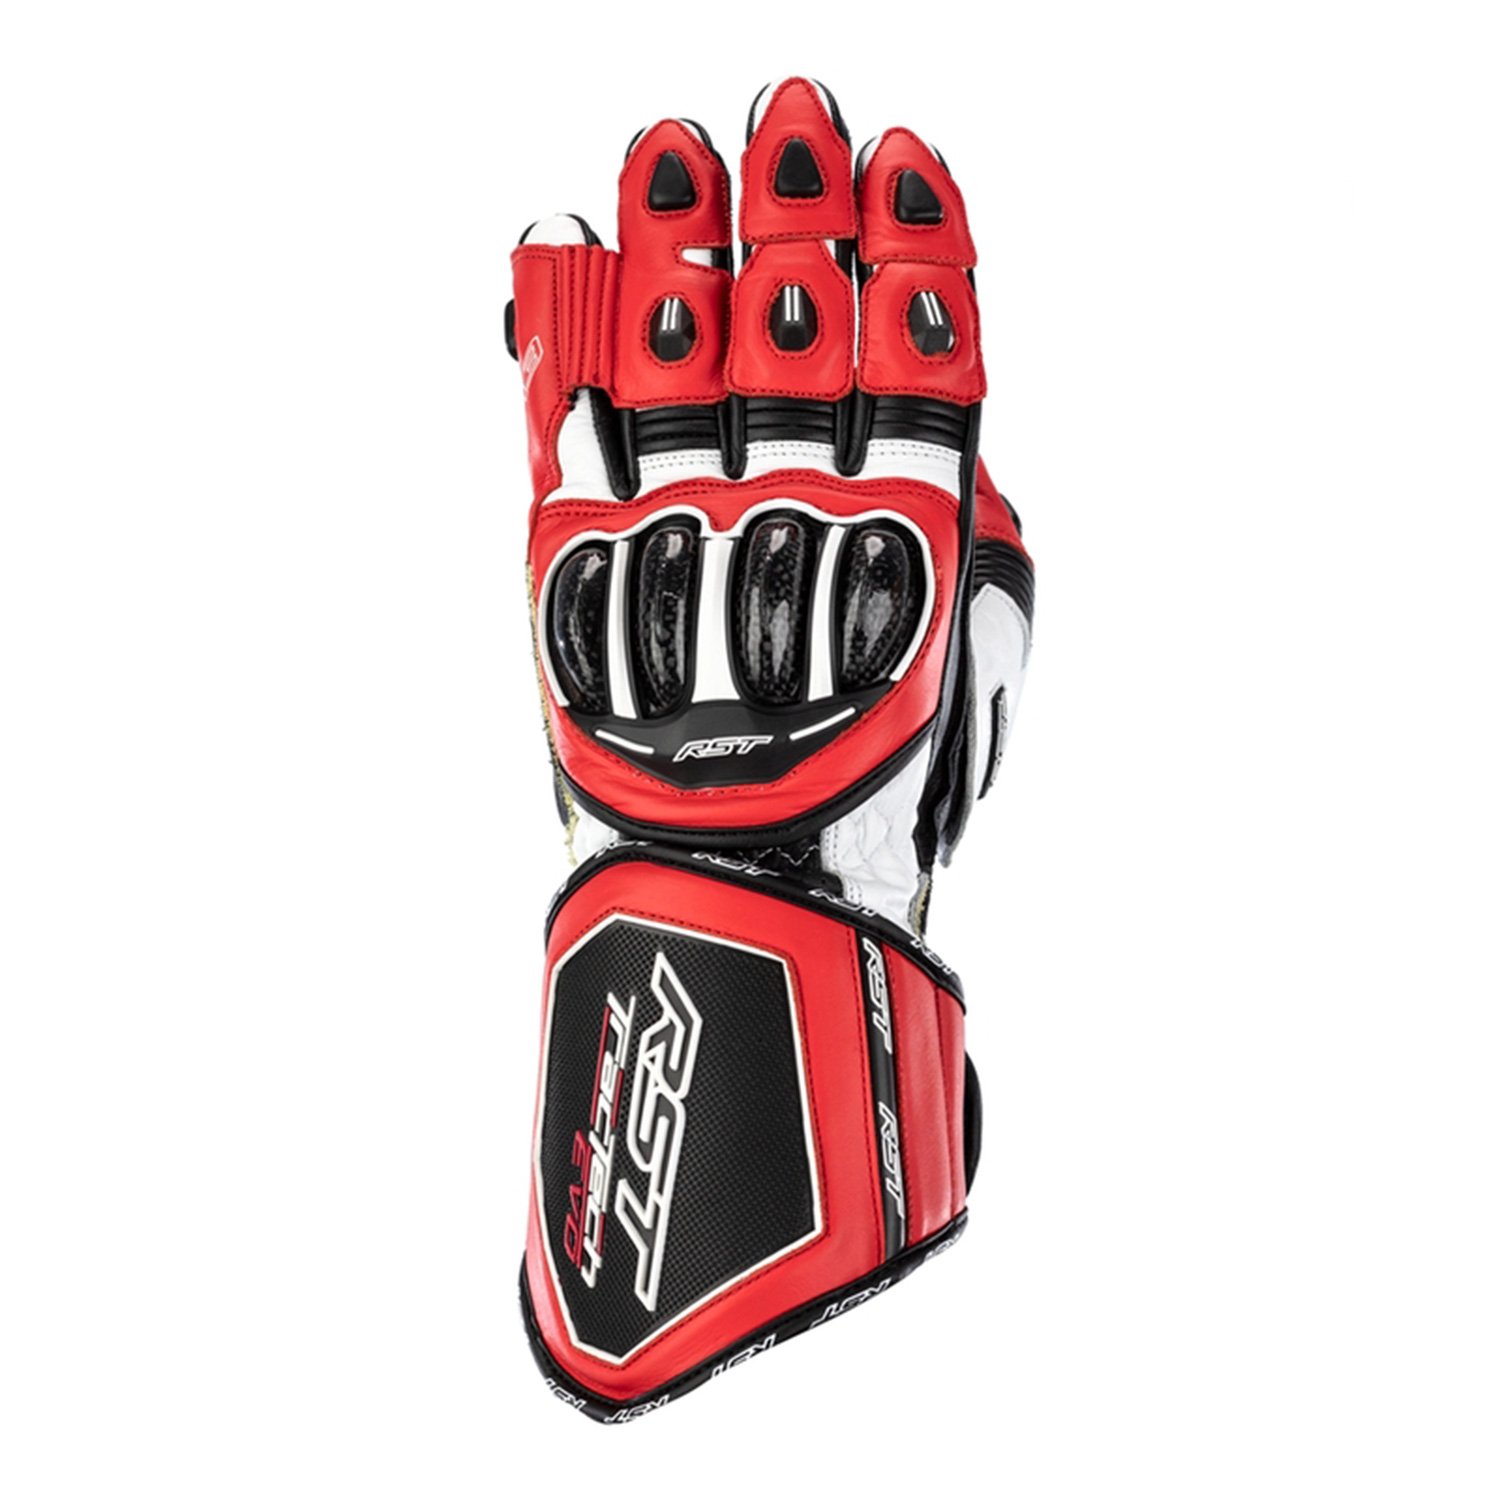 Image of RST Tractech Evo 4 Ce Mens Glove Red Black White Size 8 ID 5056136263111